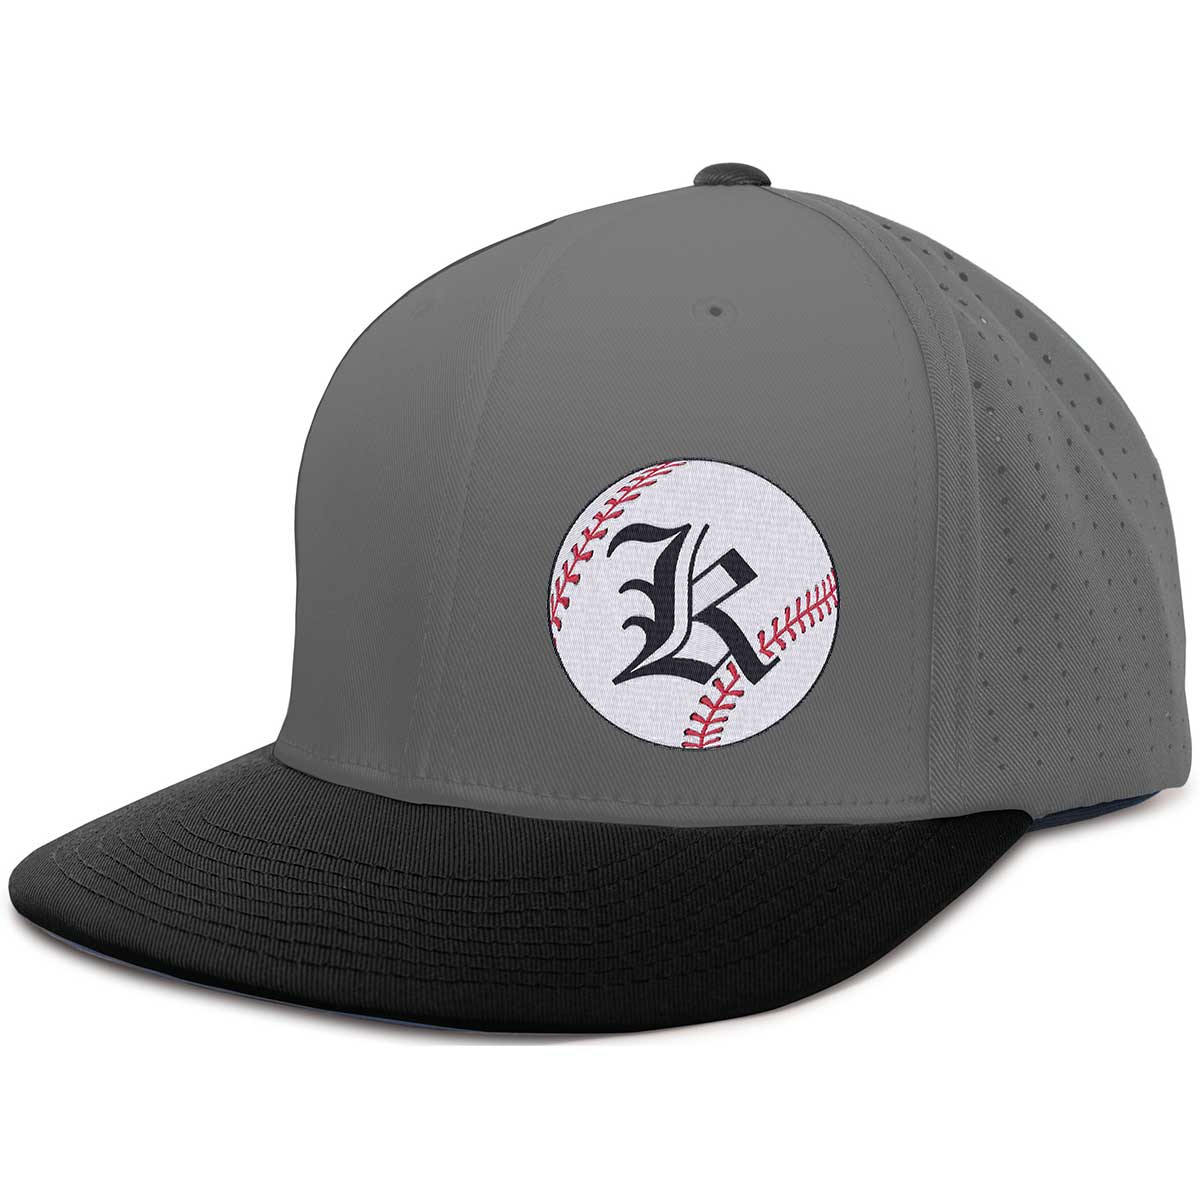 OMHS Knights Baseball Perforated Performance Flexfit Hat